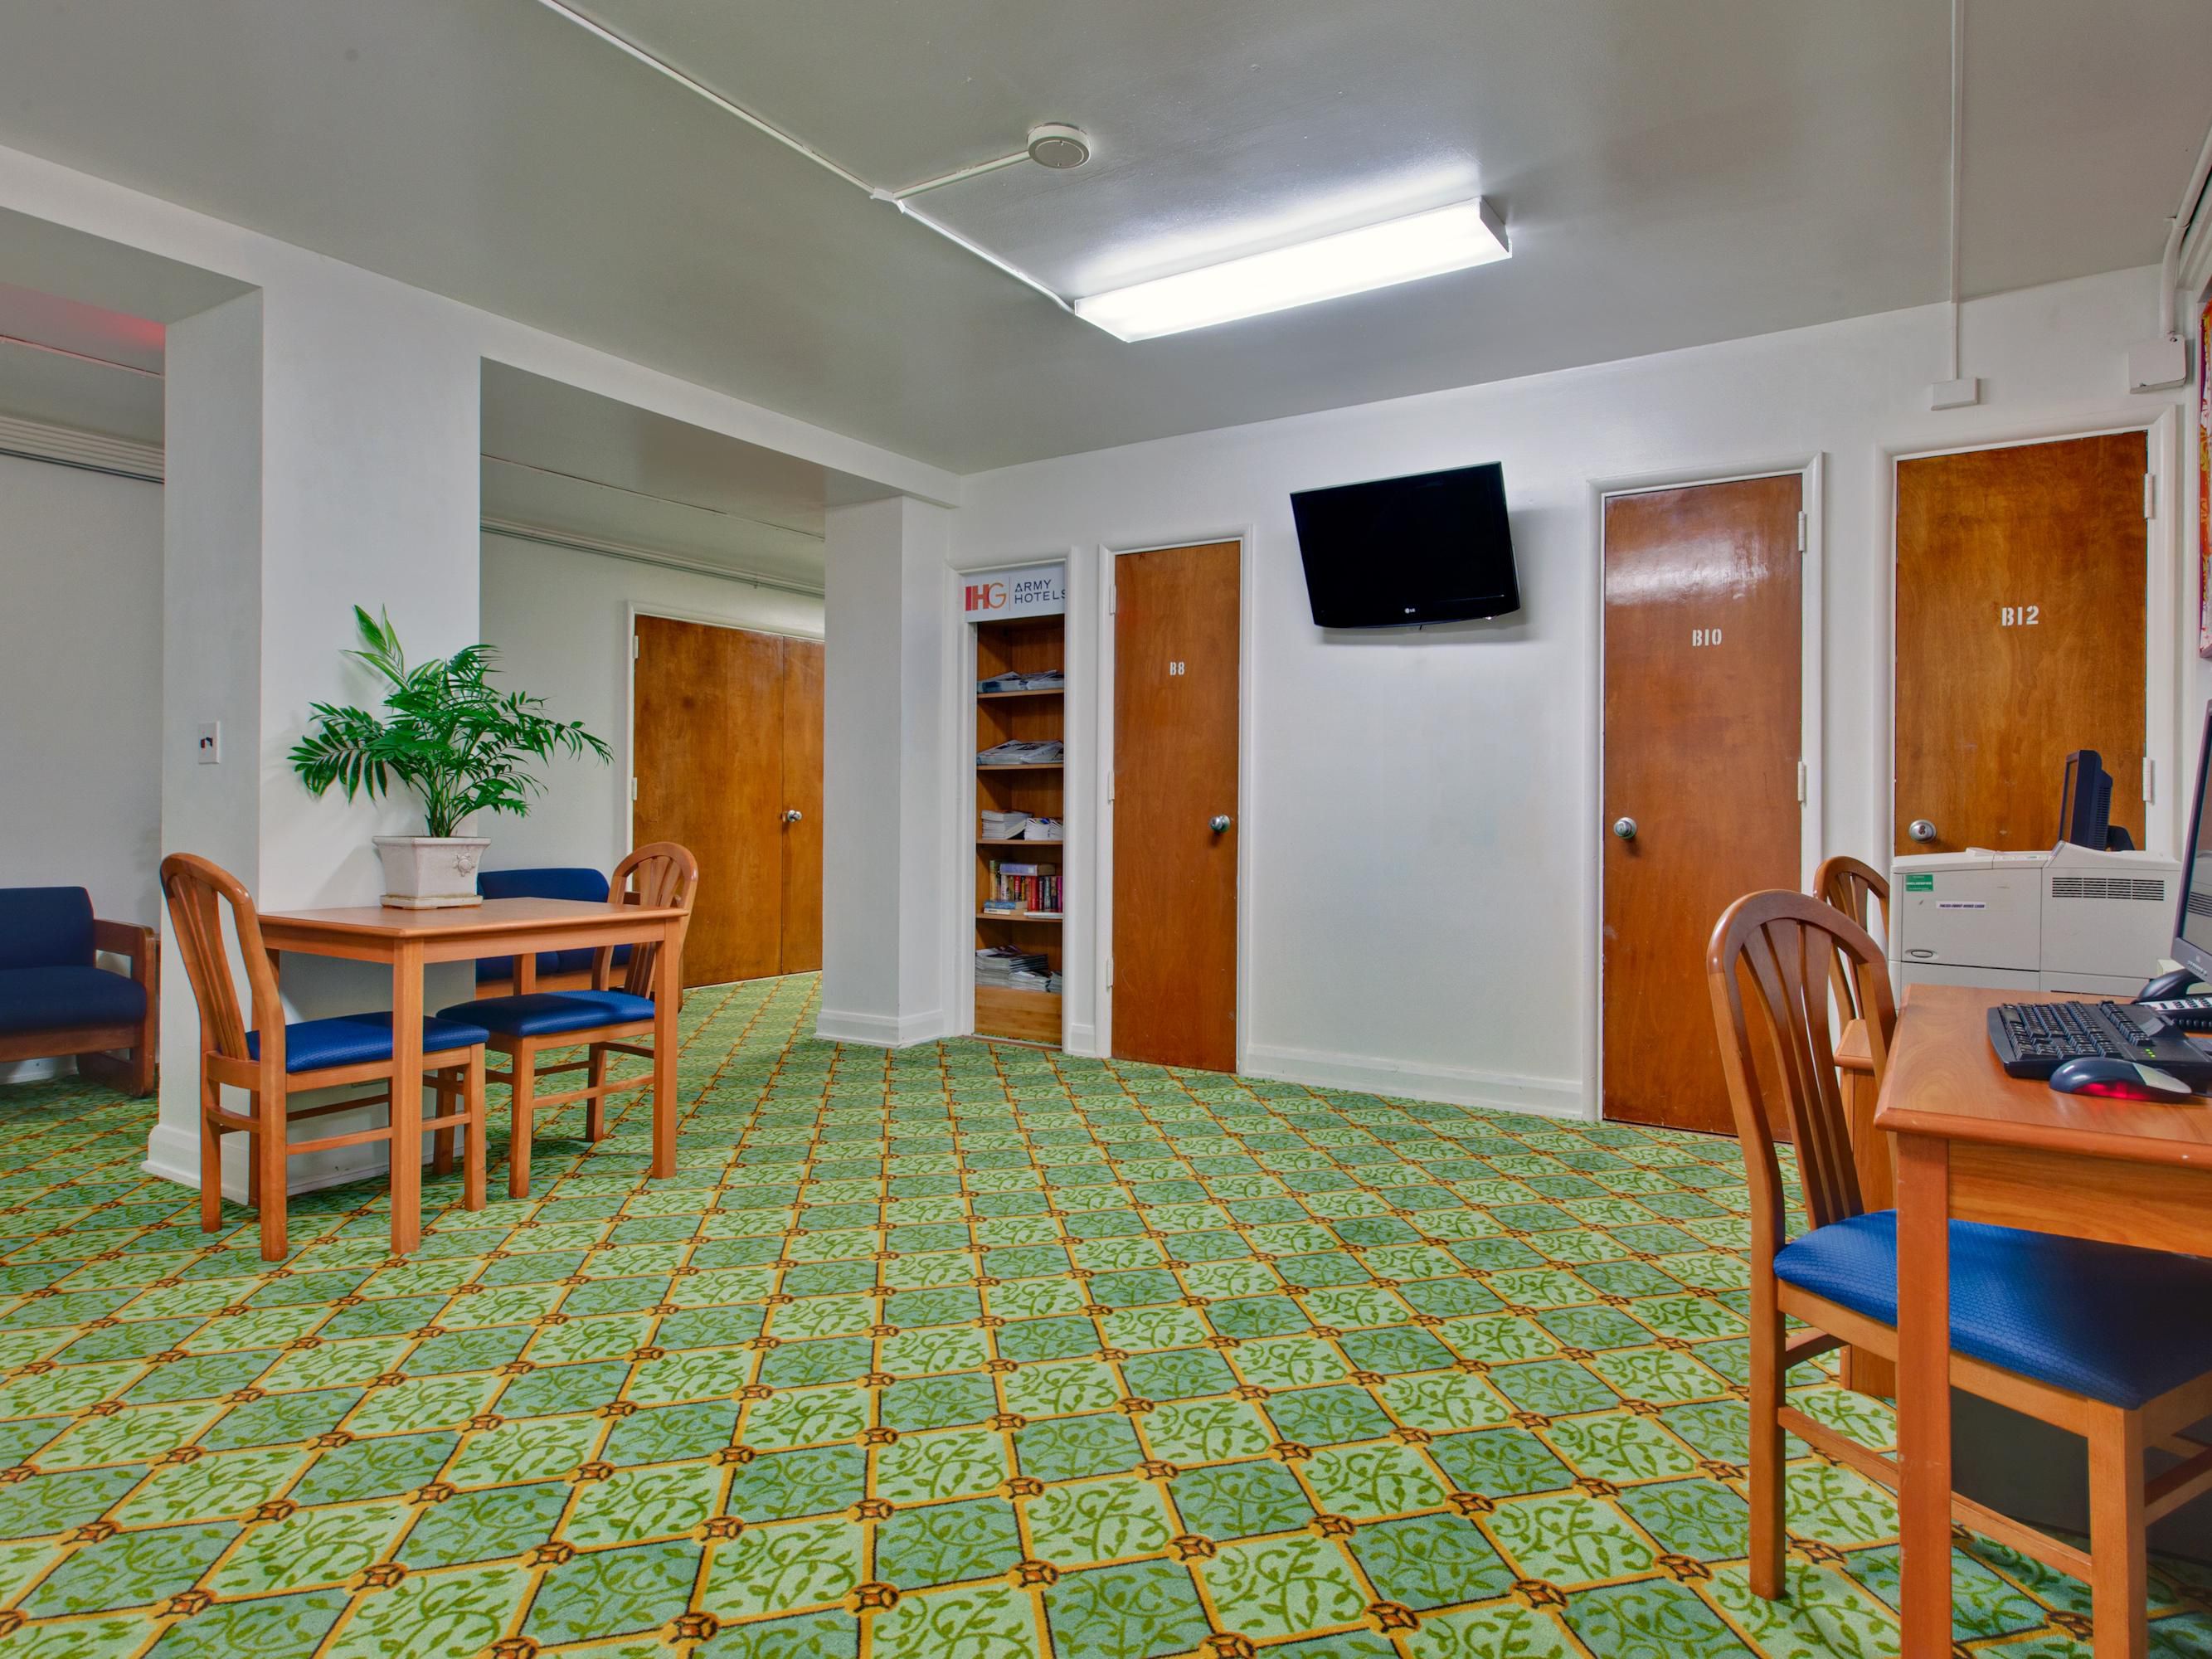 IHG Army Hotels at Ft. Shafter Building 719 Amenities